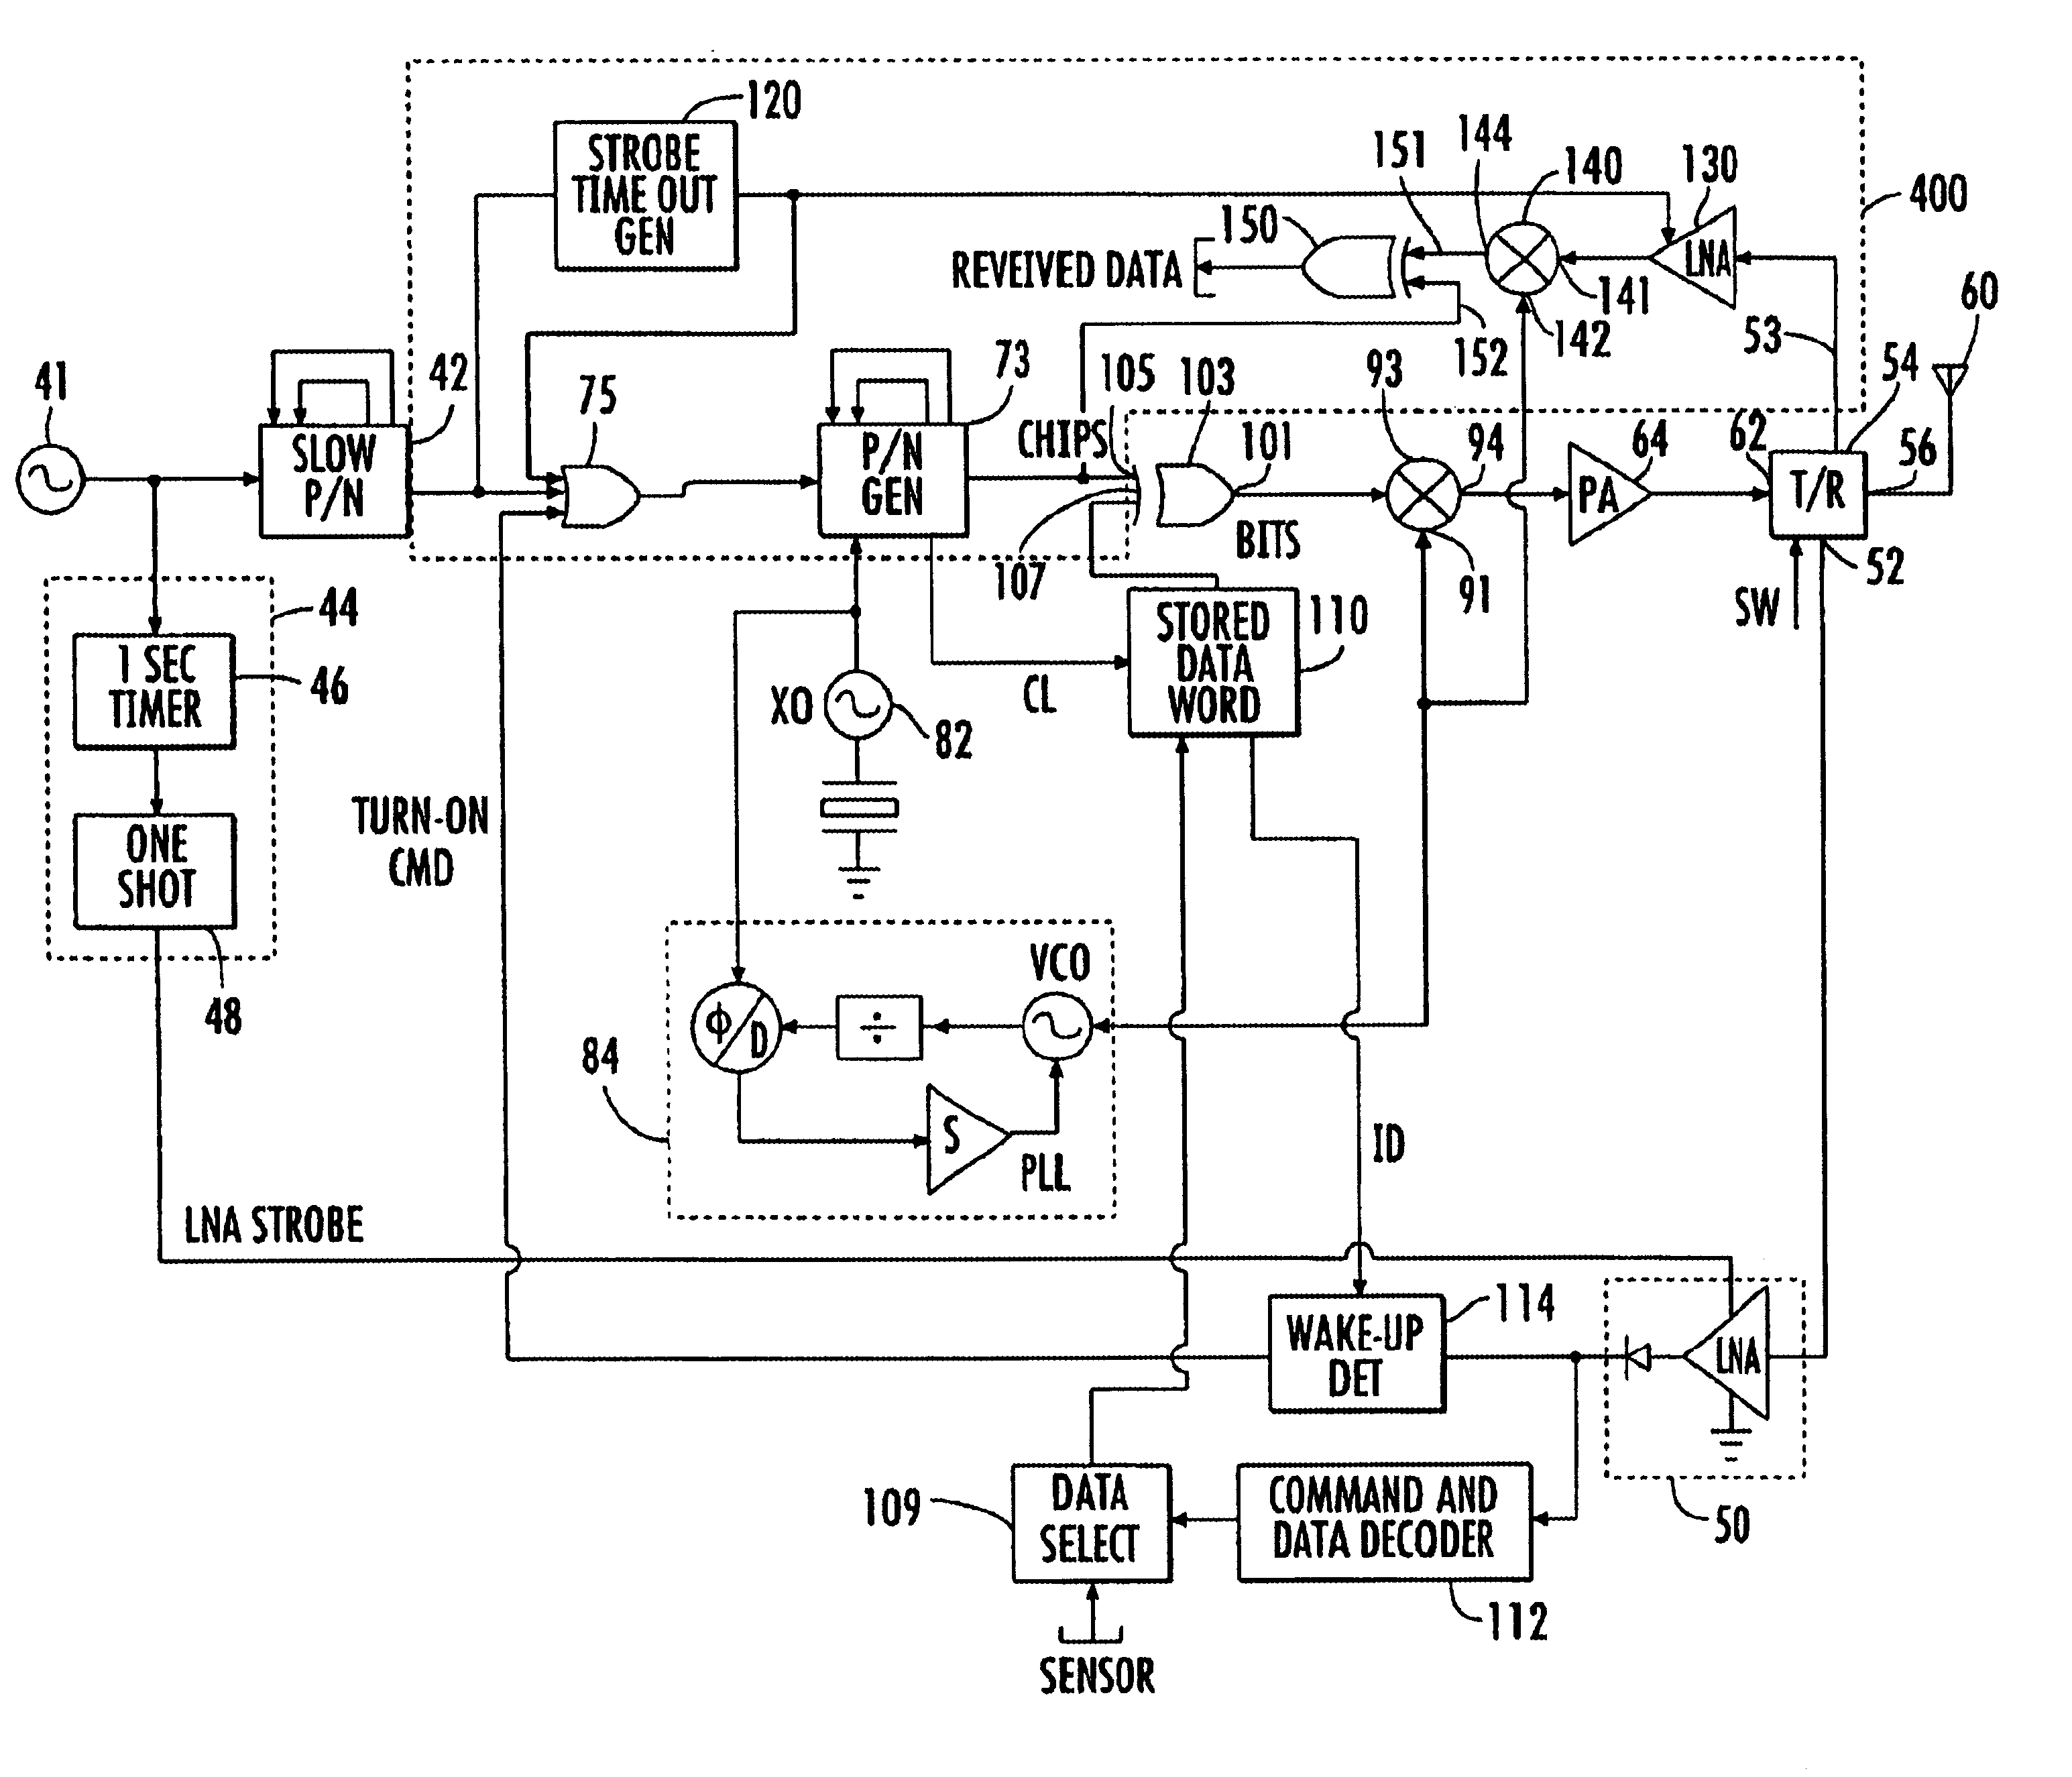 Geolocation system with controllable tags enabled by wireless communications to the tags